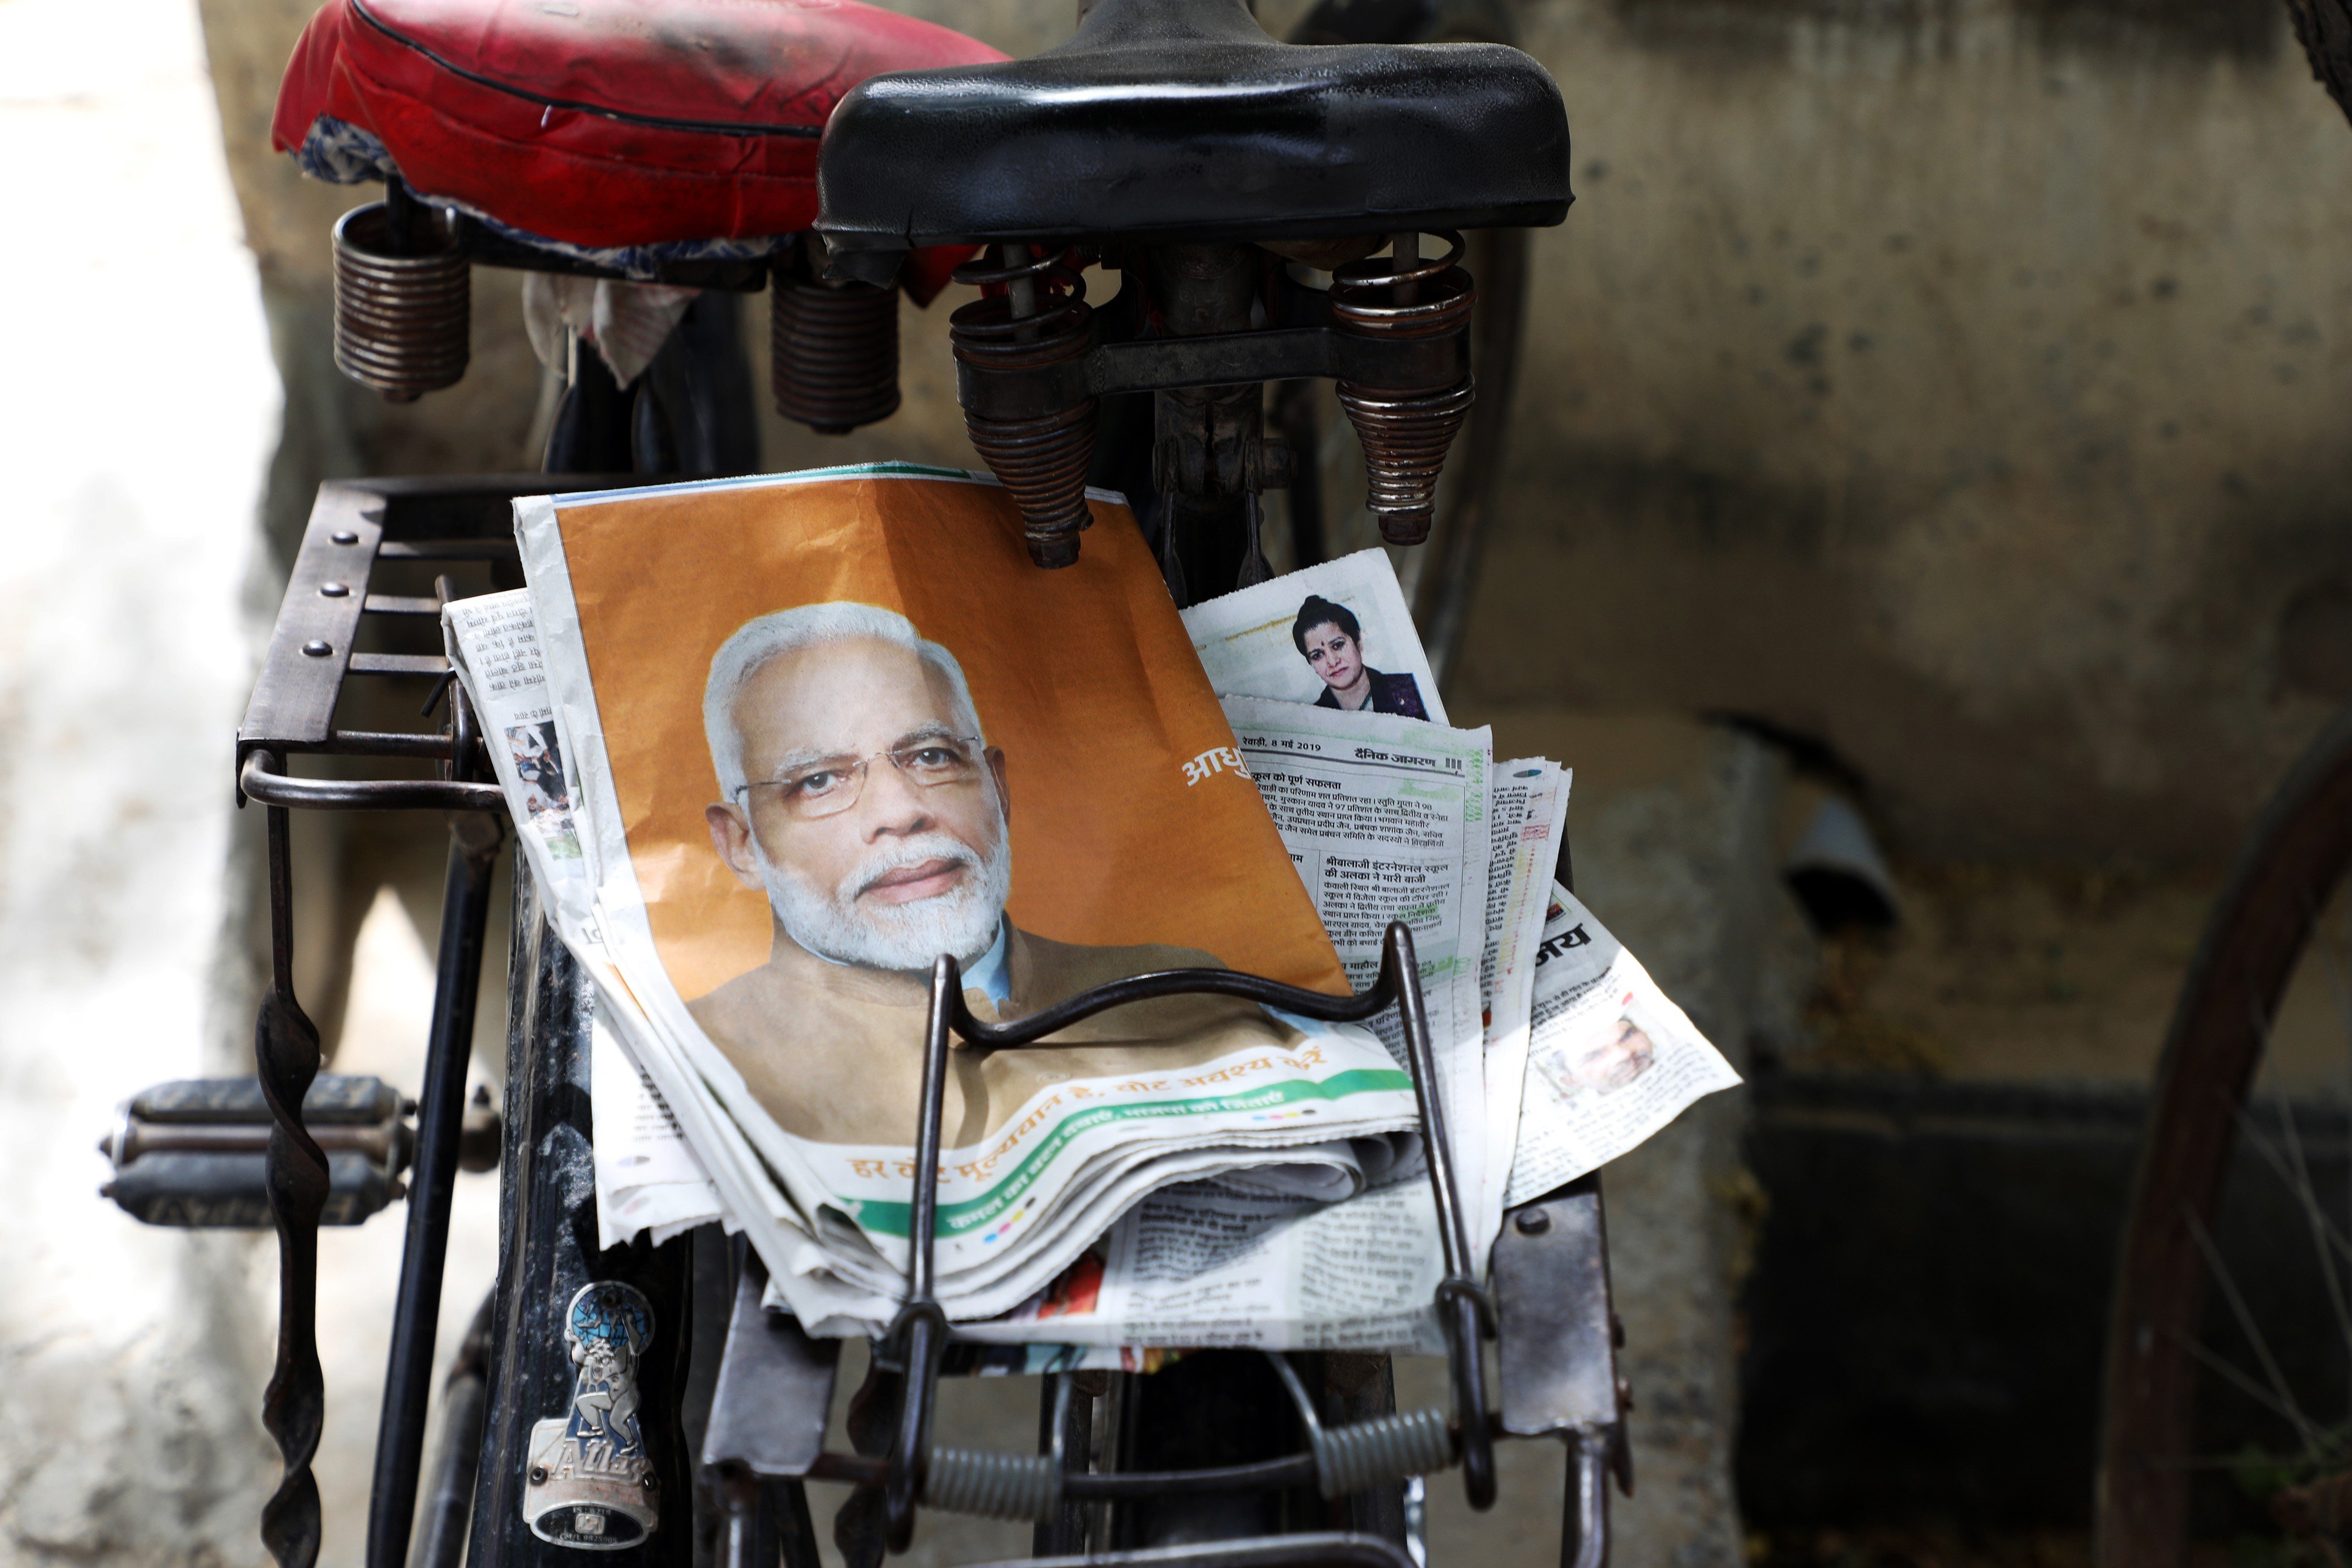 A newspaper with a wraparound cover featuring an image of Indian Prime Minister Narendra Modi sits on a bicycle rack in rural Haryana, India, on May 8. Investment in a strong state unlocks many possible options for tackling India’s housing crisis. Photo: Bloomberg